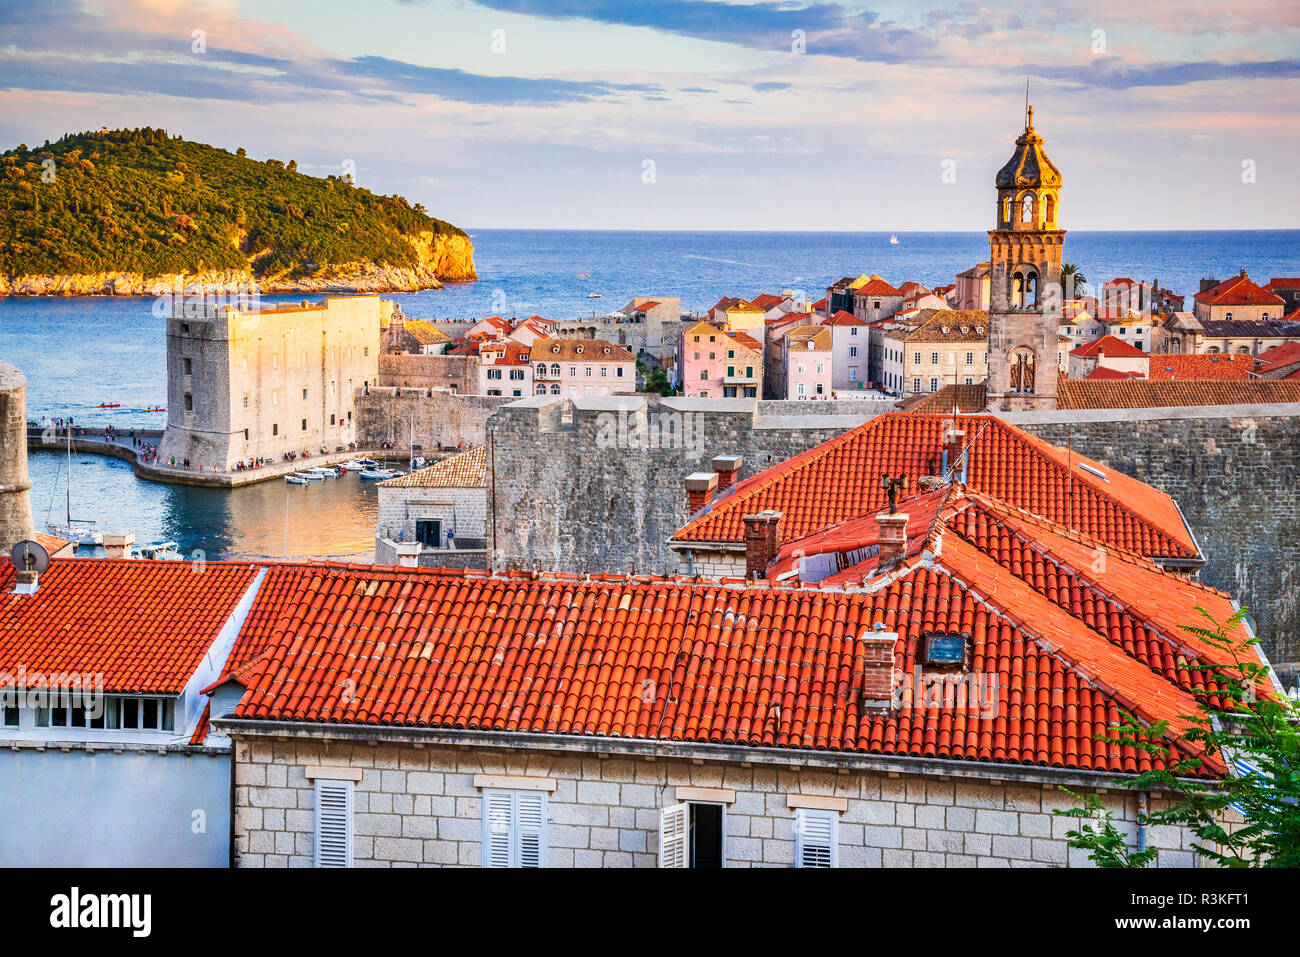 Dubrovnik, Croatia. Spectacular twilight picturesque view on the old town, medieval Ragusa on Dalmatian Coast. Stock Photo